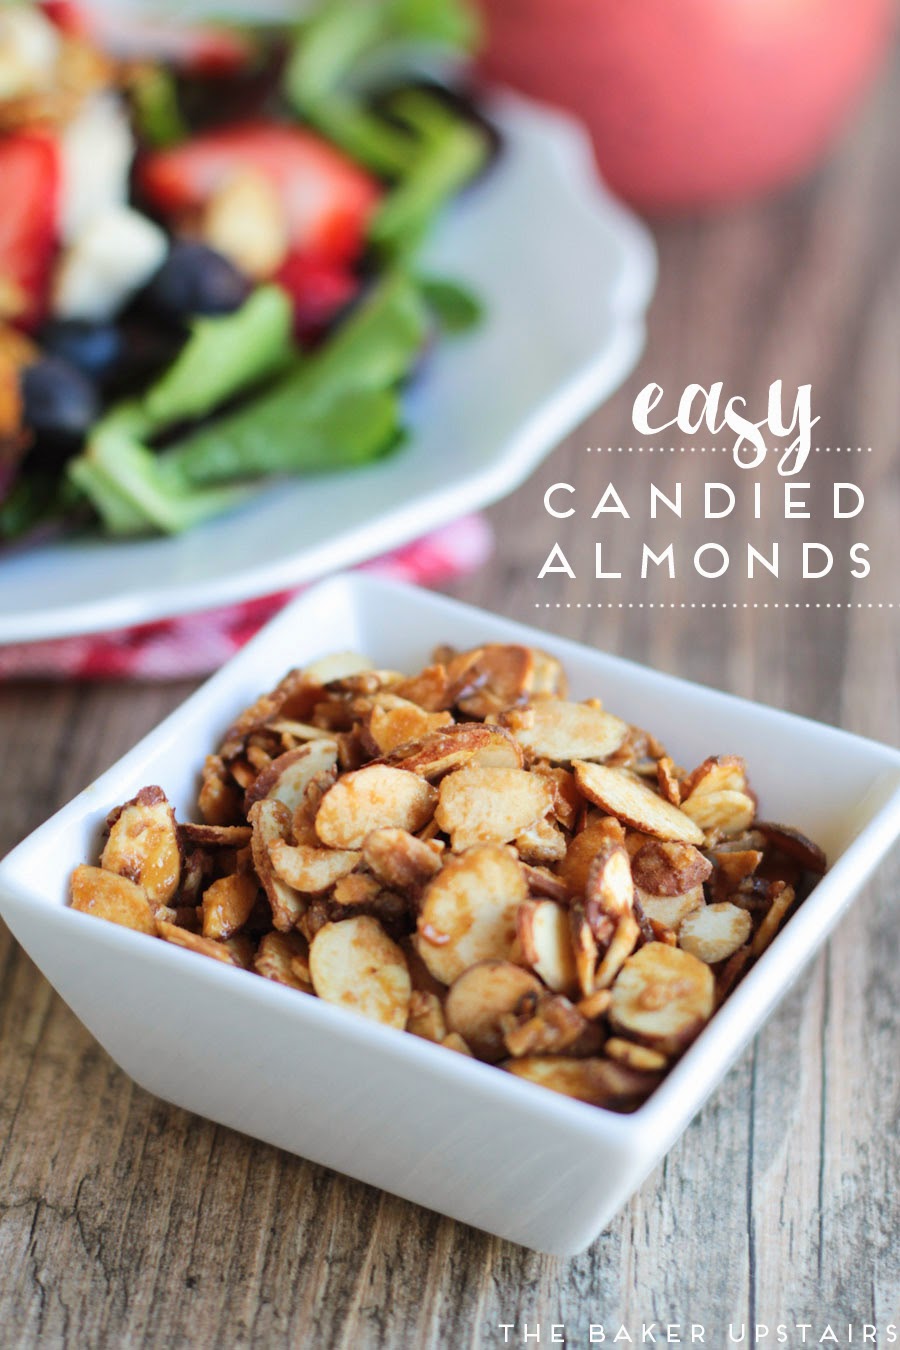 Berry chicken salad and easy candied almonds - so fresh, healthy, and delicious!